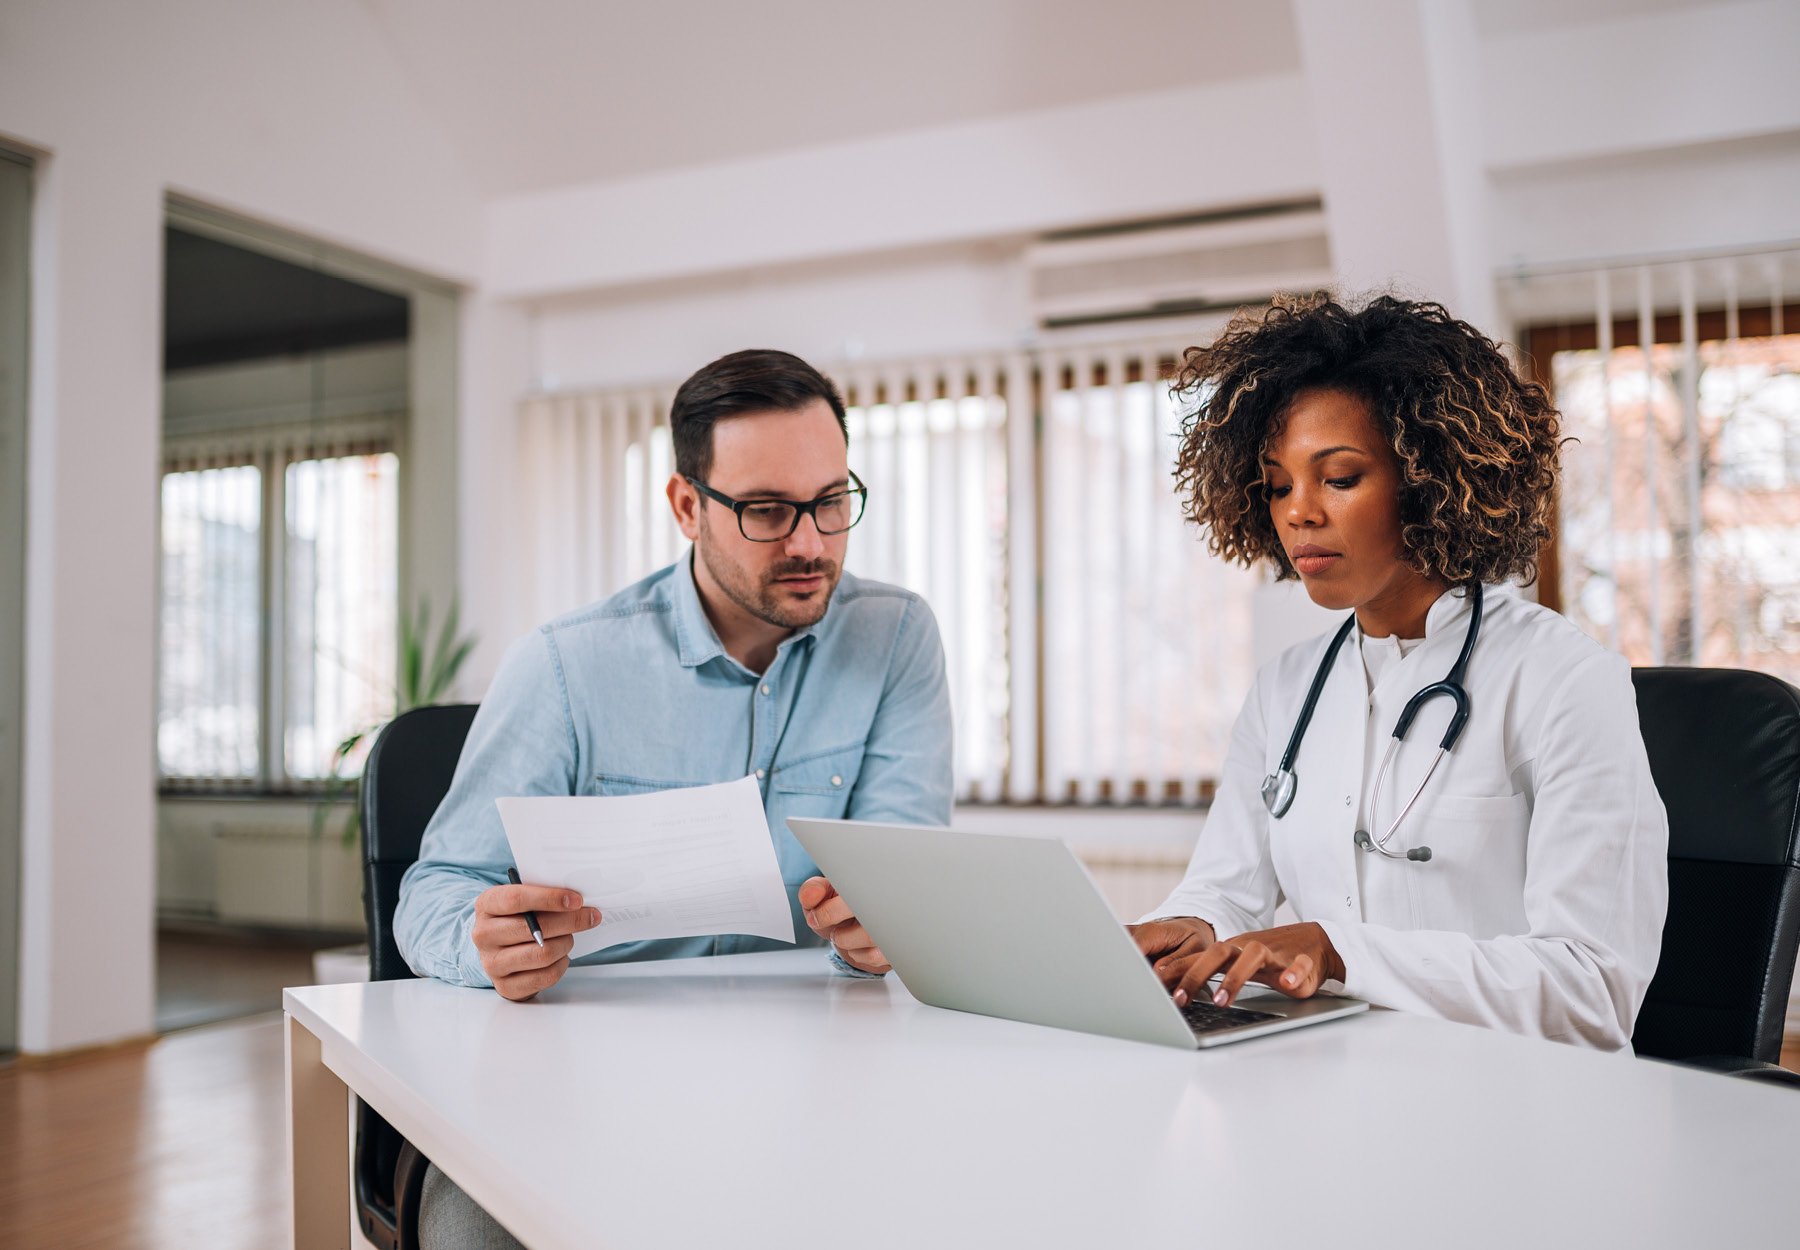 Doctor meeting with medical employee at a desk. The doctor is typing on her laptop and the employee is holding a piece of paper. Stock photo.